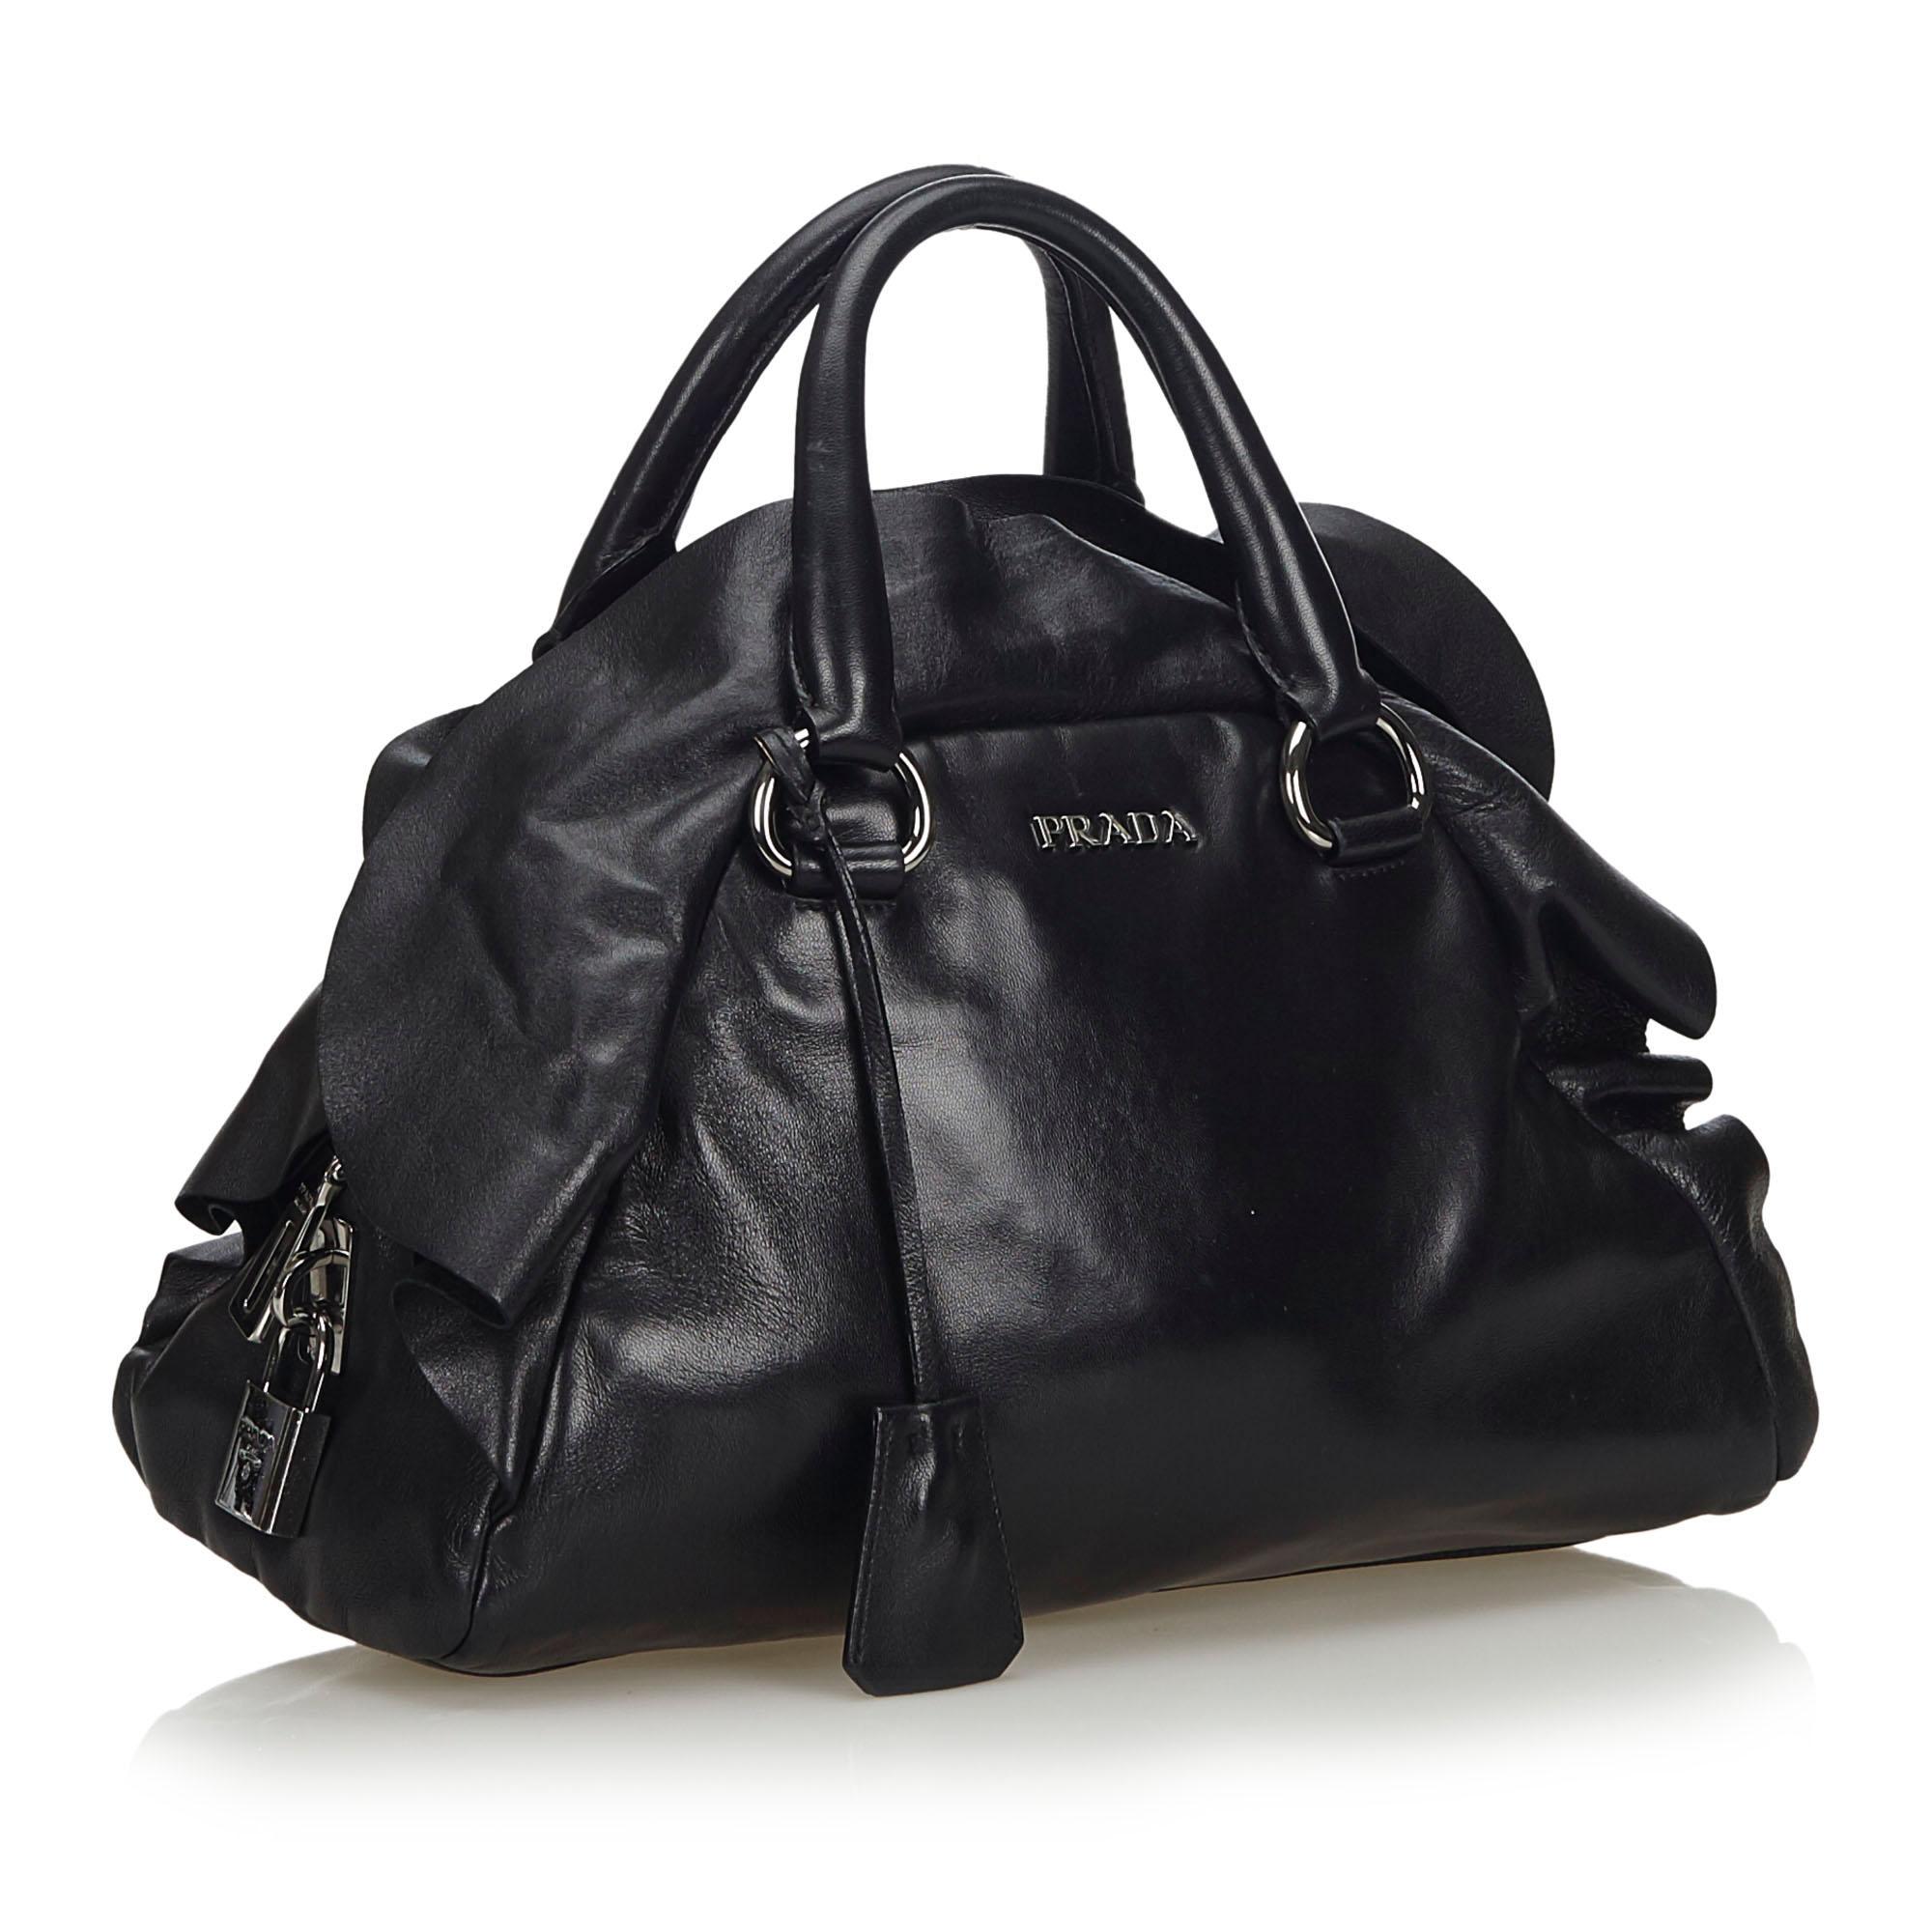 The Mordore handbag features a leather body, a ruffle detail, rolled leather handles, a clochette, a top zip closure, and interior zip and slip pockets. It carries as B+ condition rating.

Inclusions: 
This item does not come with